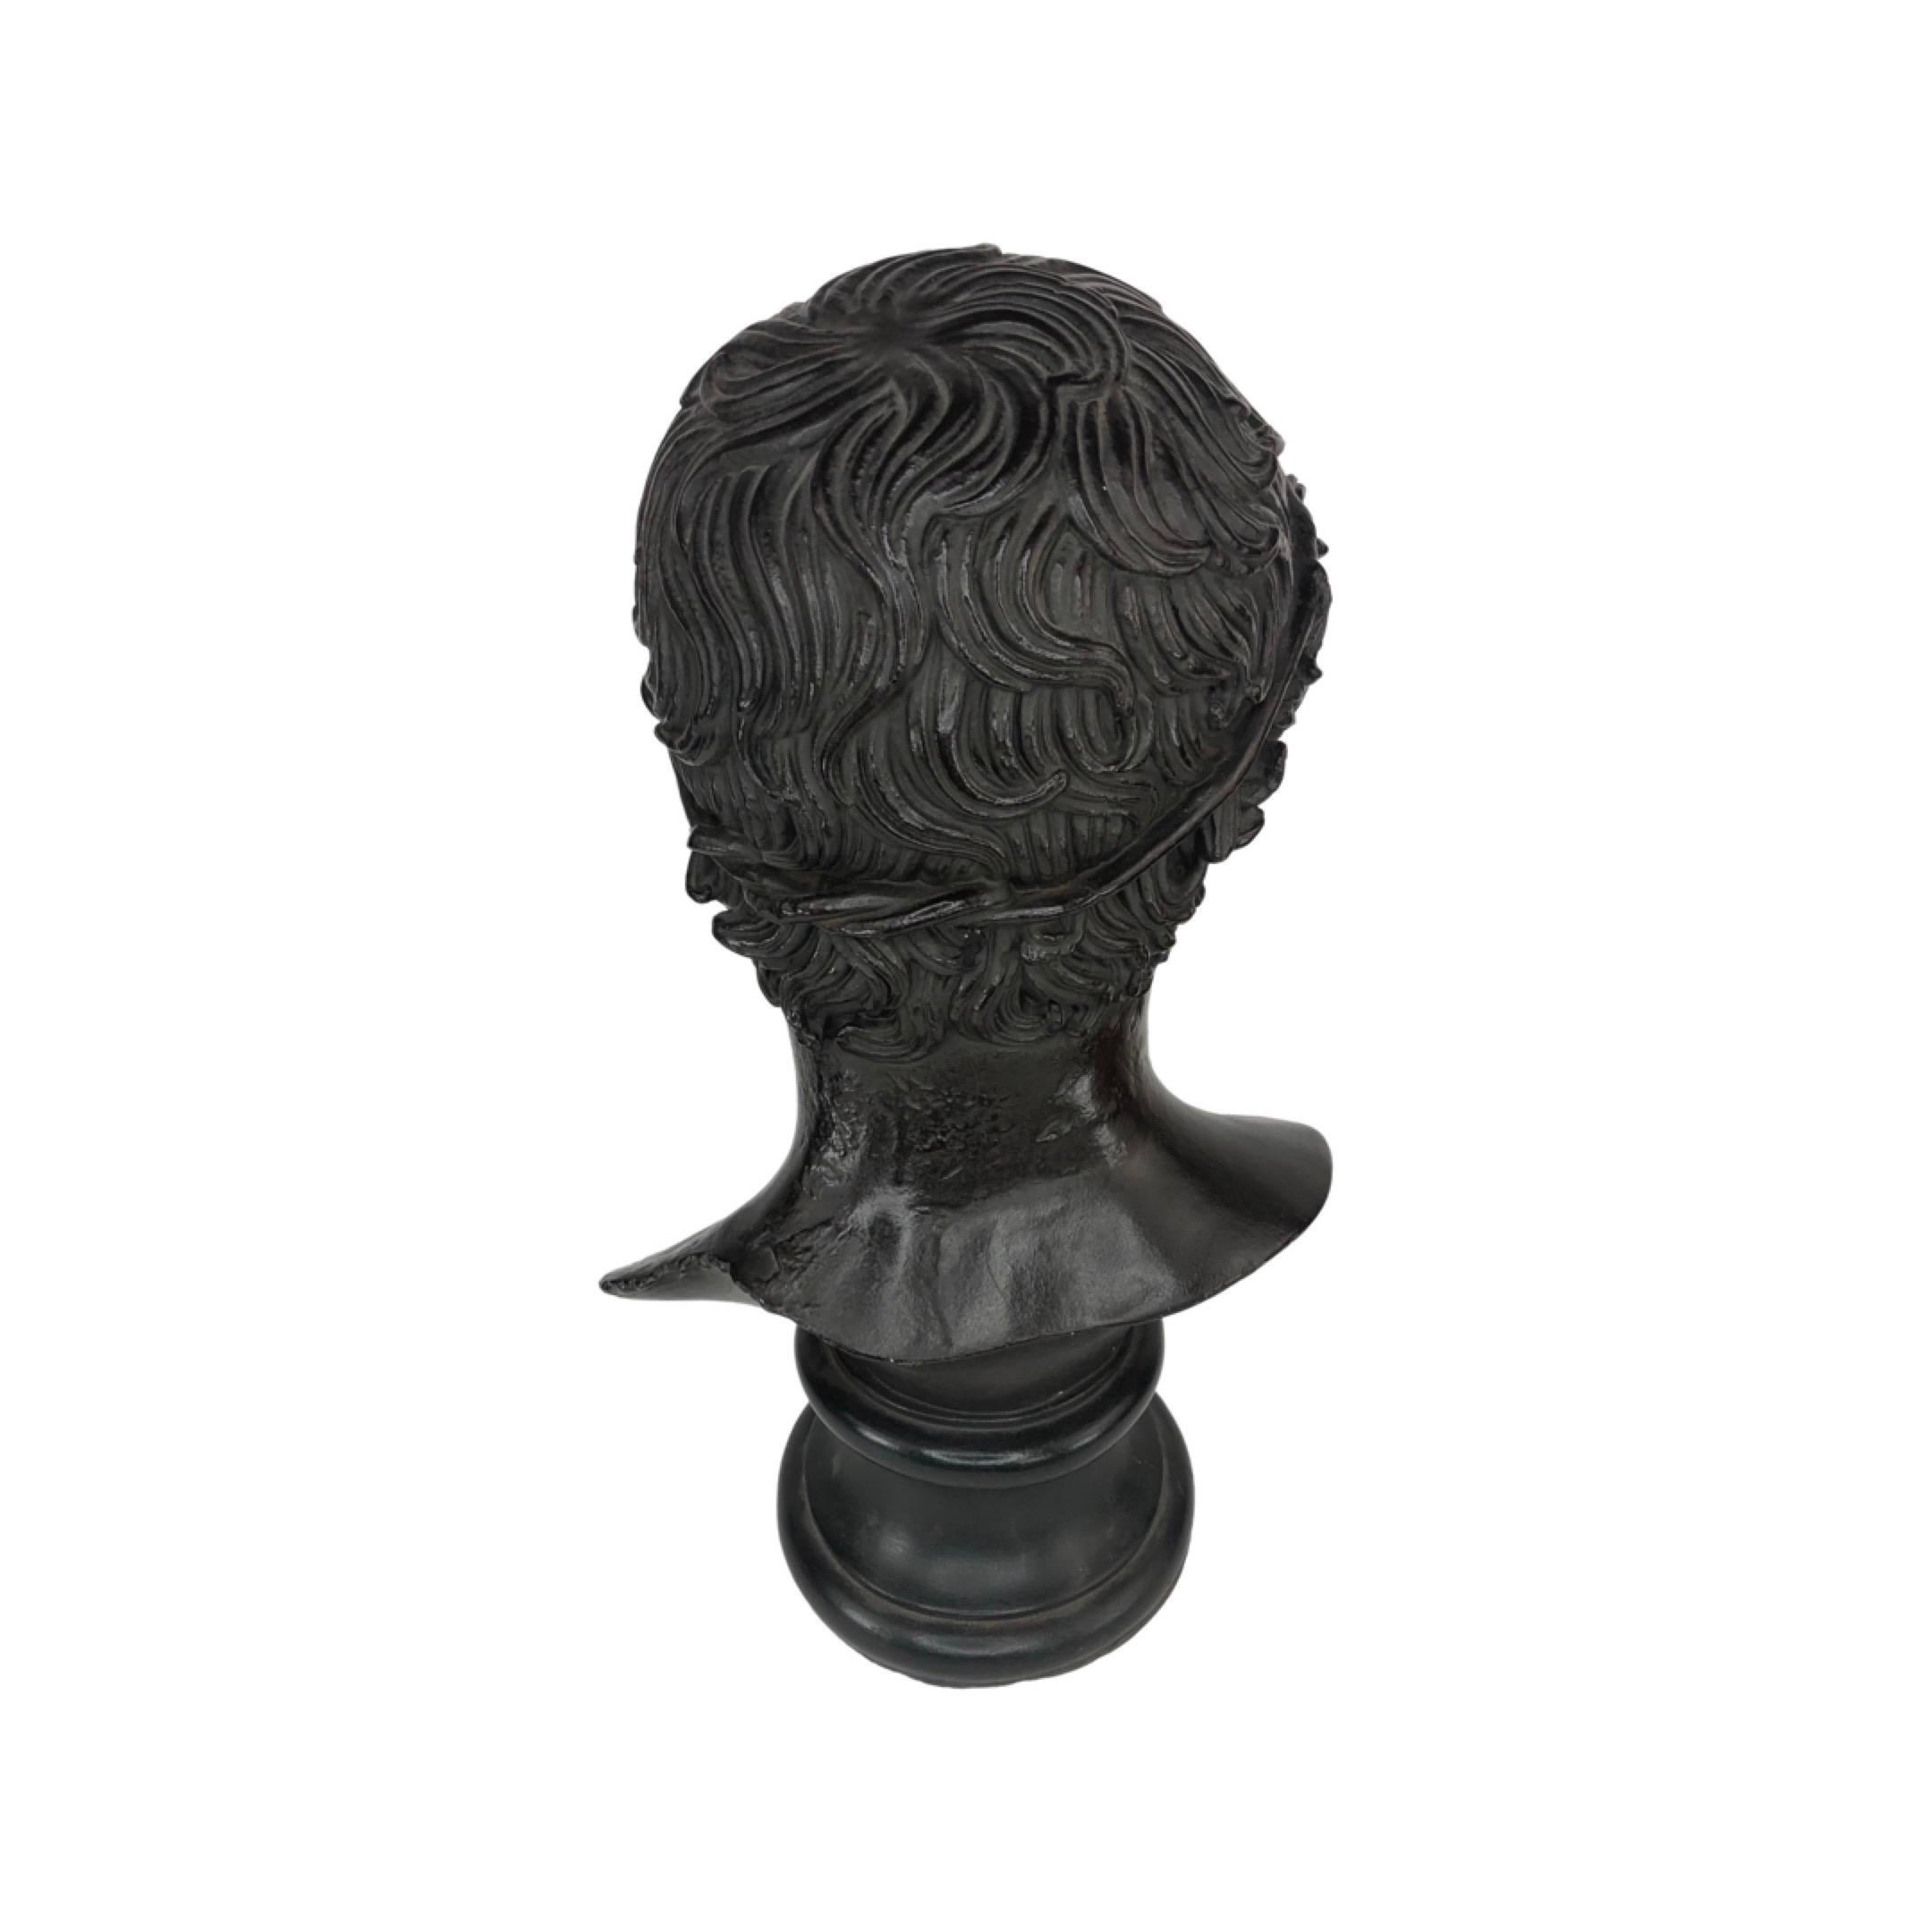 Hand-Crafted Bust of De Benevent Head or Head of a Victorious Athlete by Austin Prod